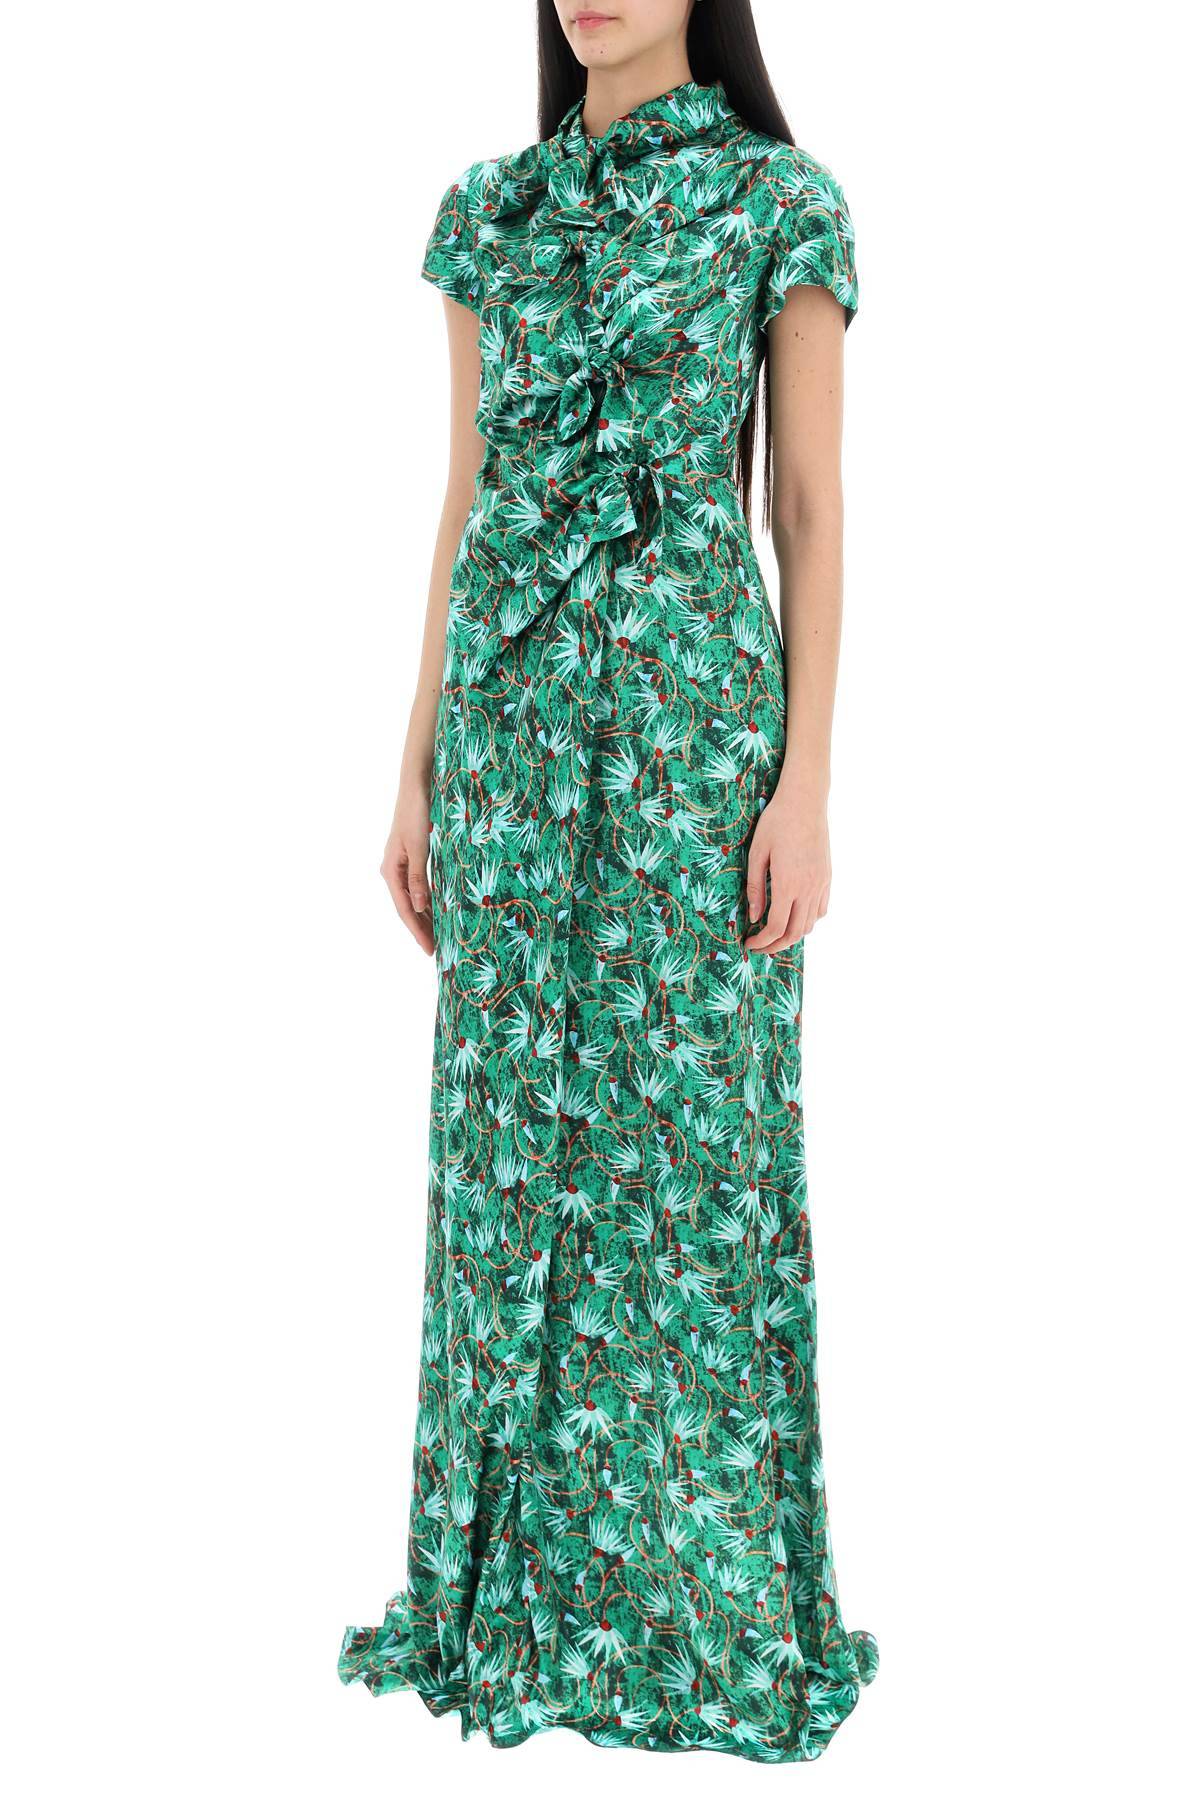 Shop Saloni Maxi Floral Dress Kelly With Bows In Green